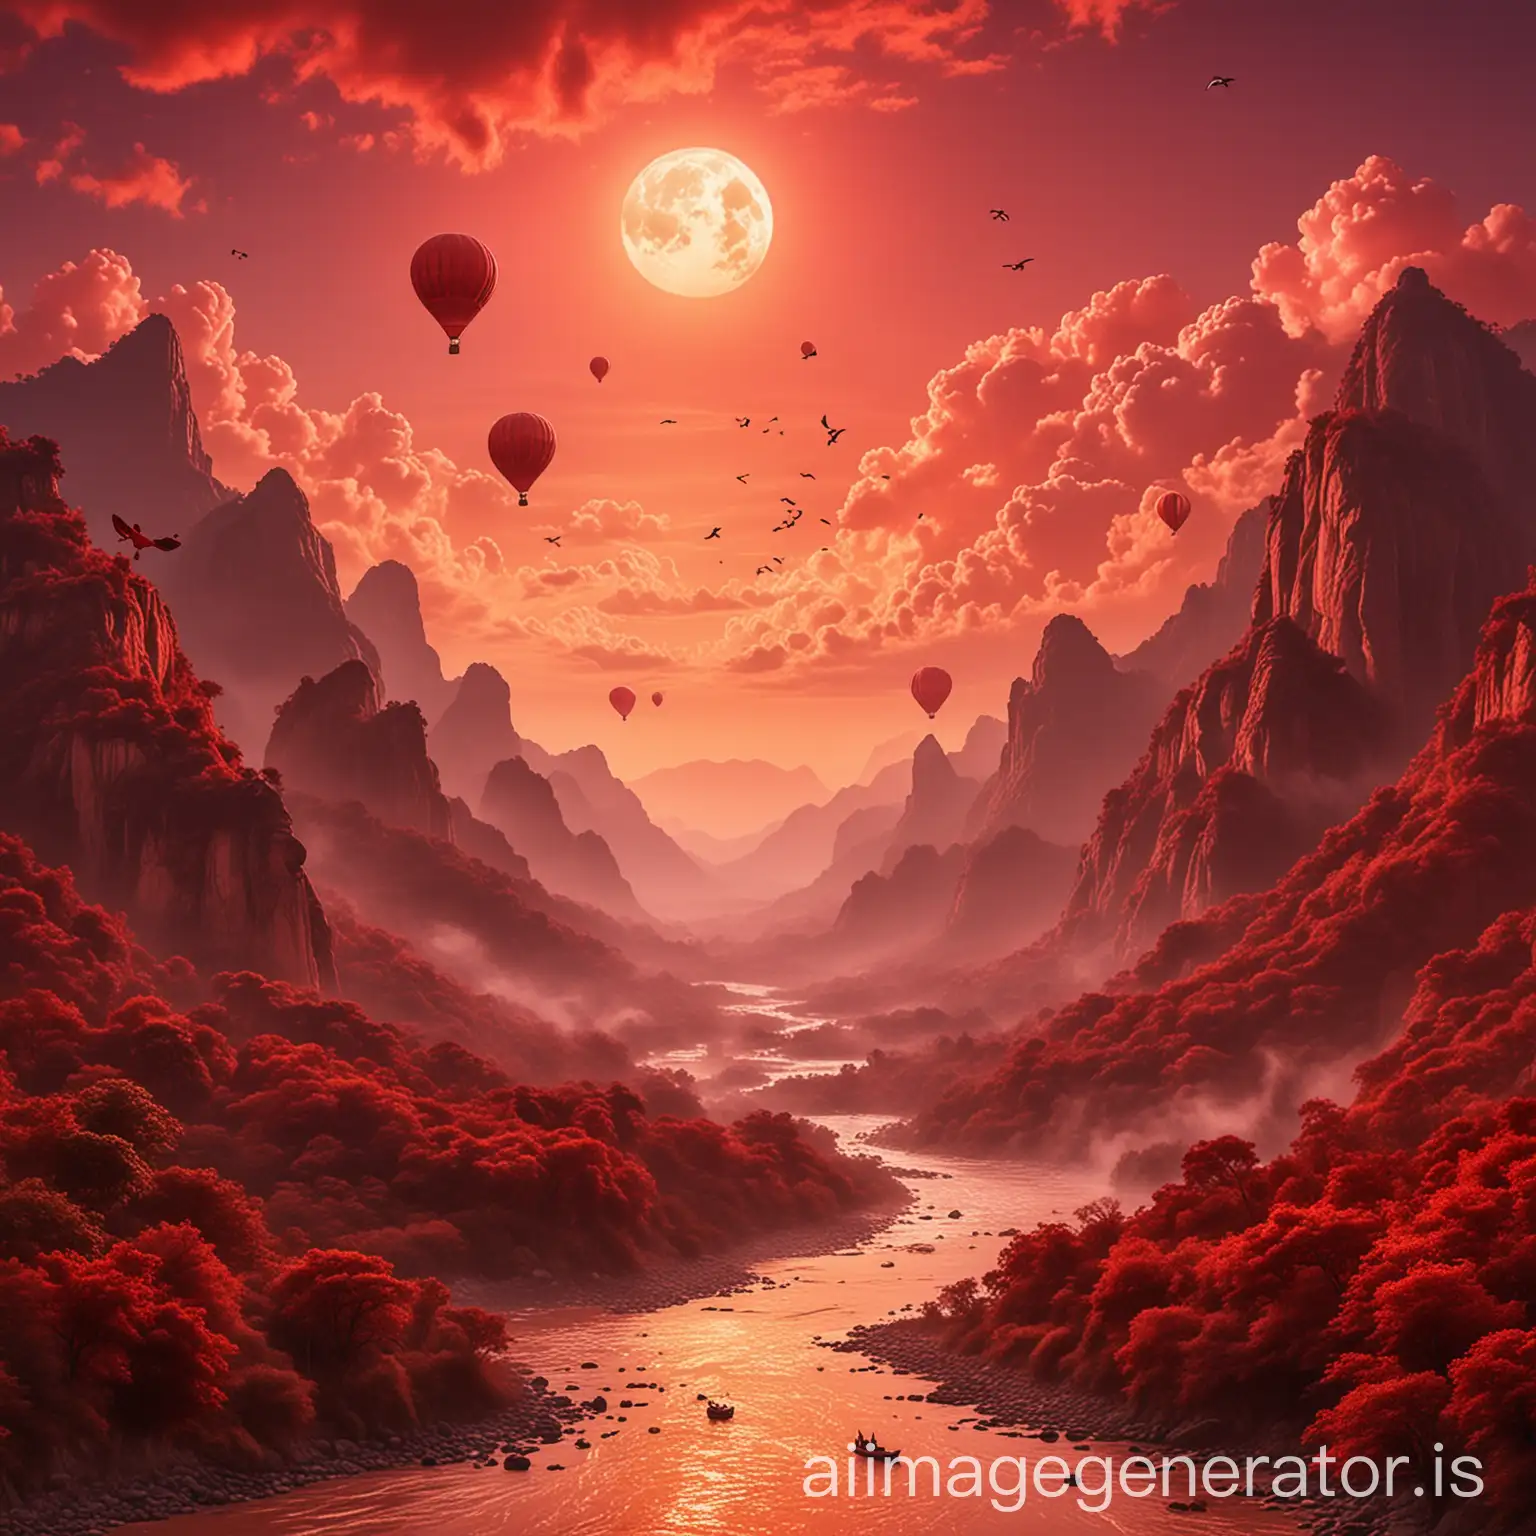 Red-Moon-Over-Bajrangbali-Statue-and-Hot-Air-Balloons-in-Vibrant-Jungle-Landscape